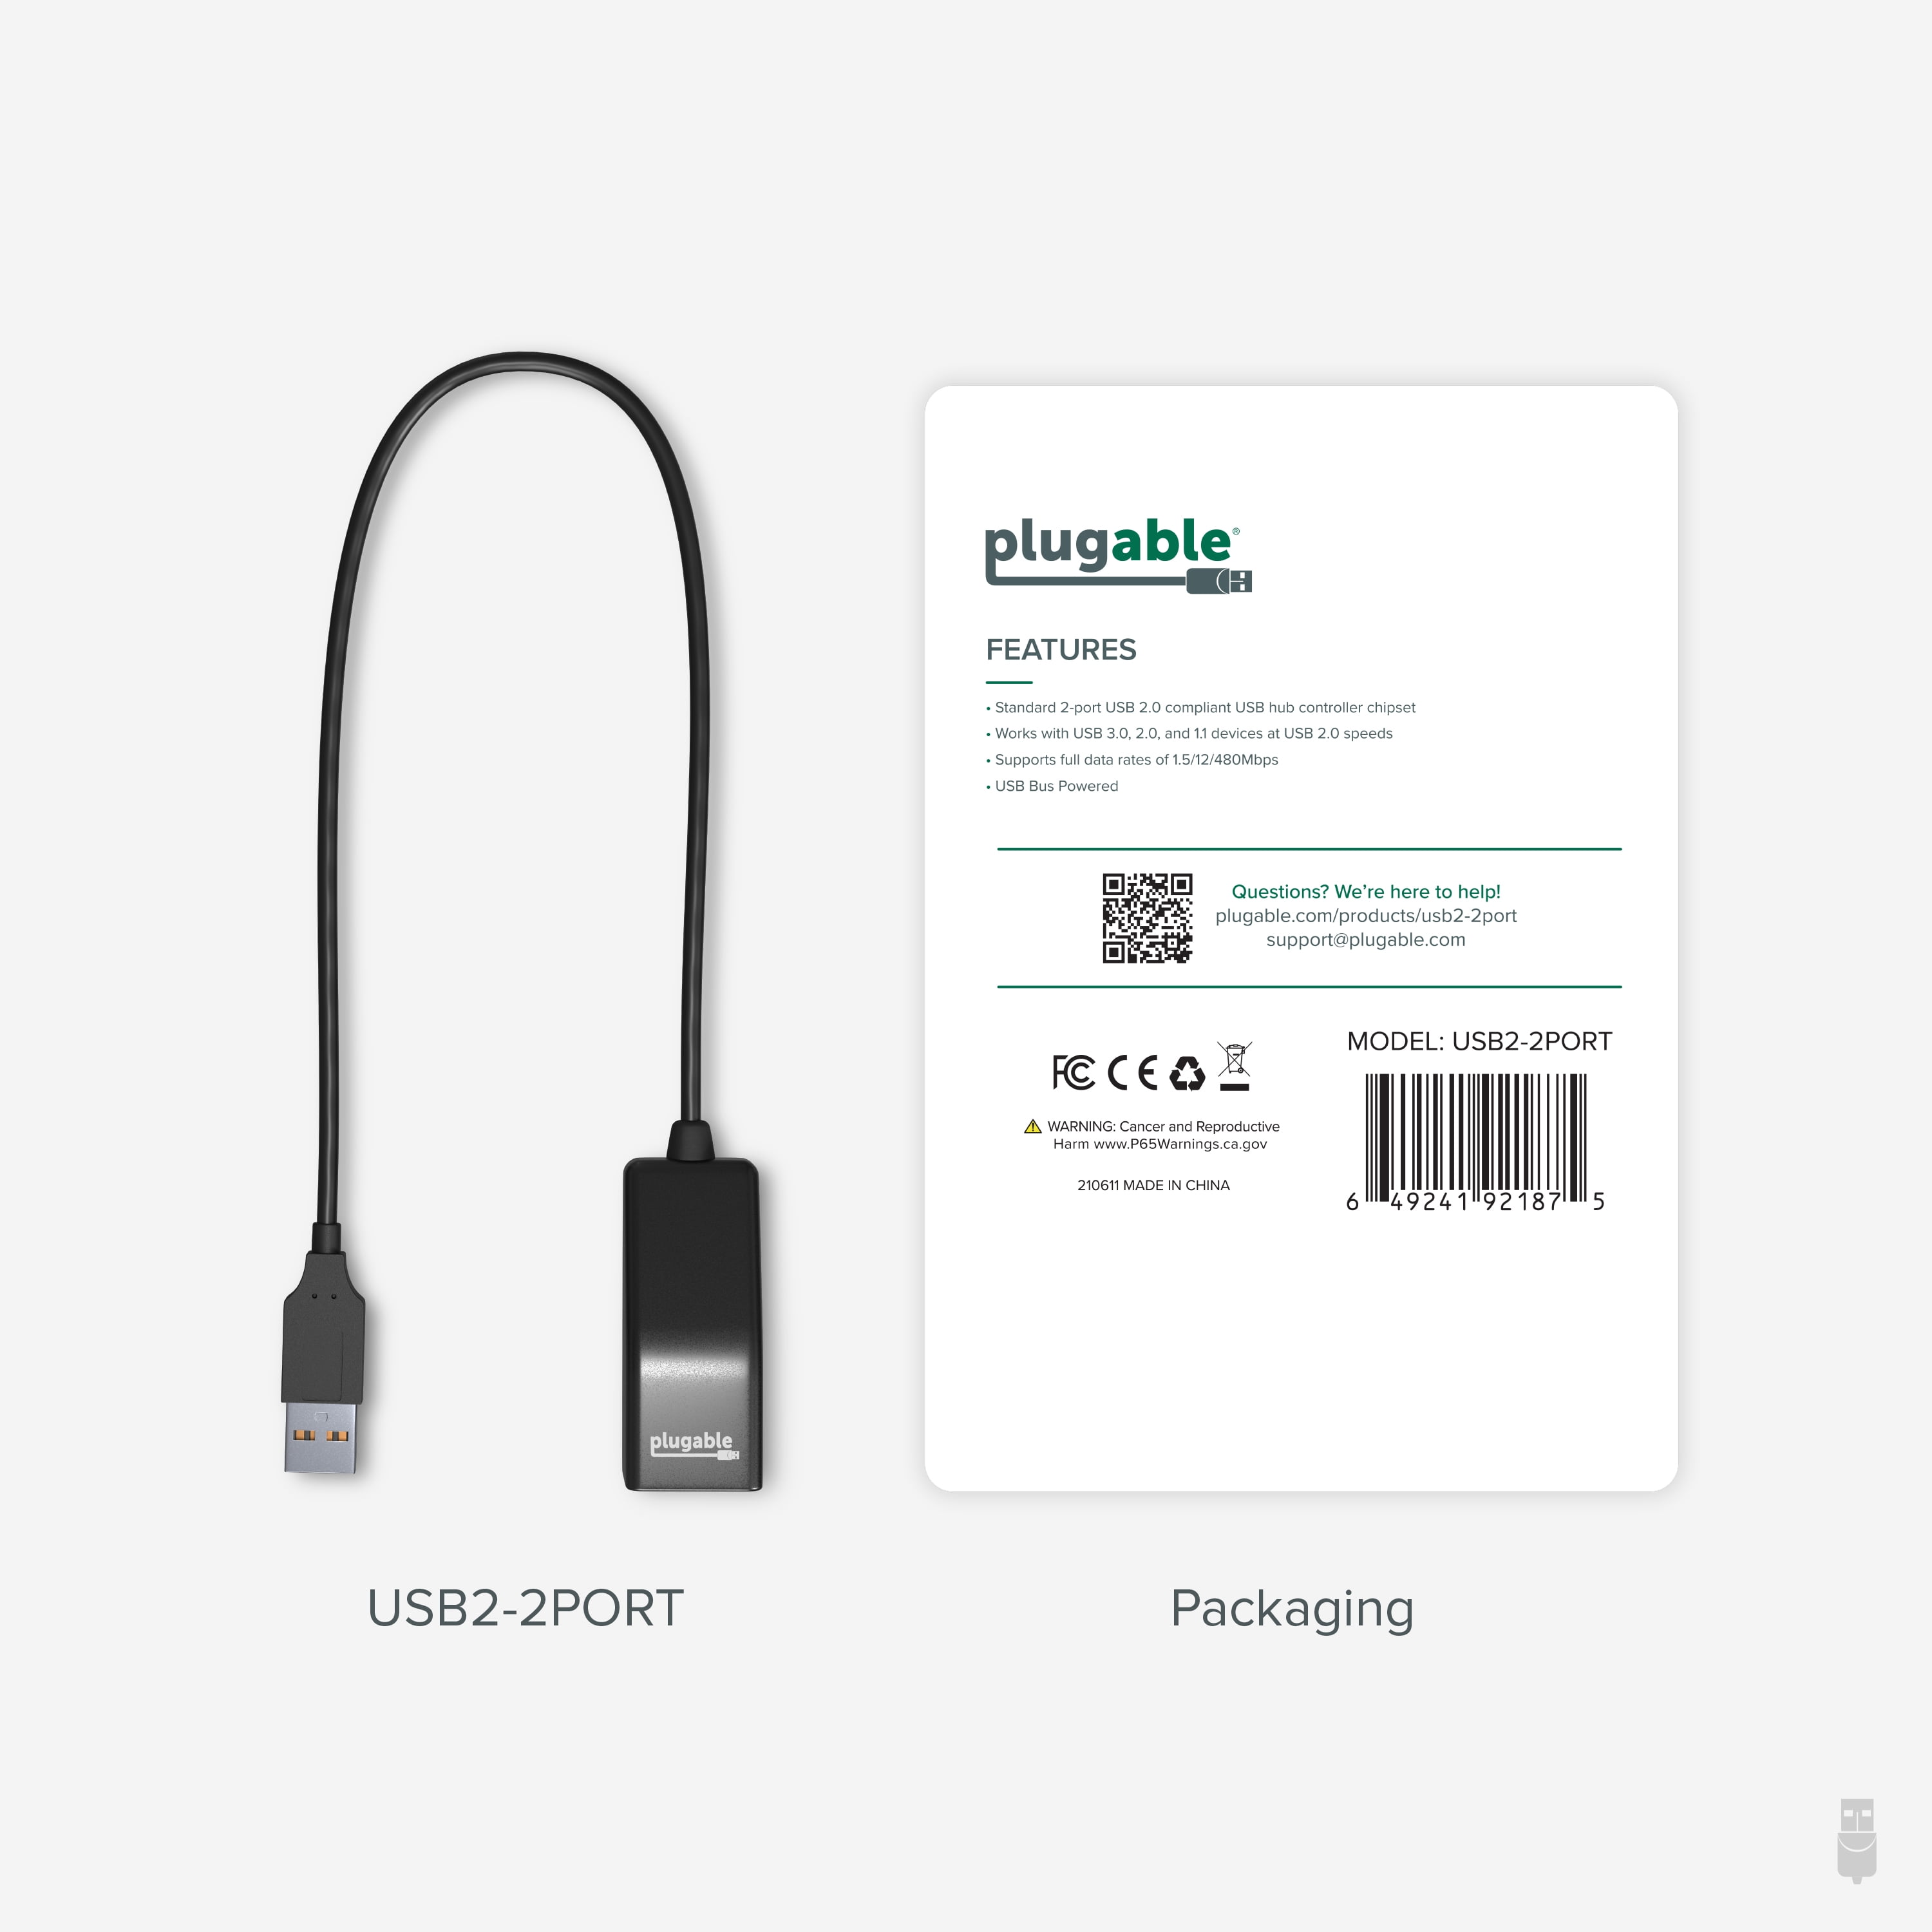 Plugable 2-in-1 USB Splitter Dual USB 2.0 Ports, Compatible with Windows, Linux, macOS, Chrome OS, USB Multiport Hub for Laptops - Walmart.com